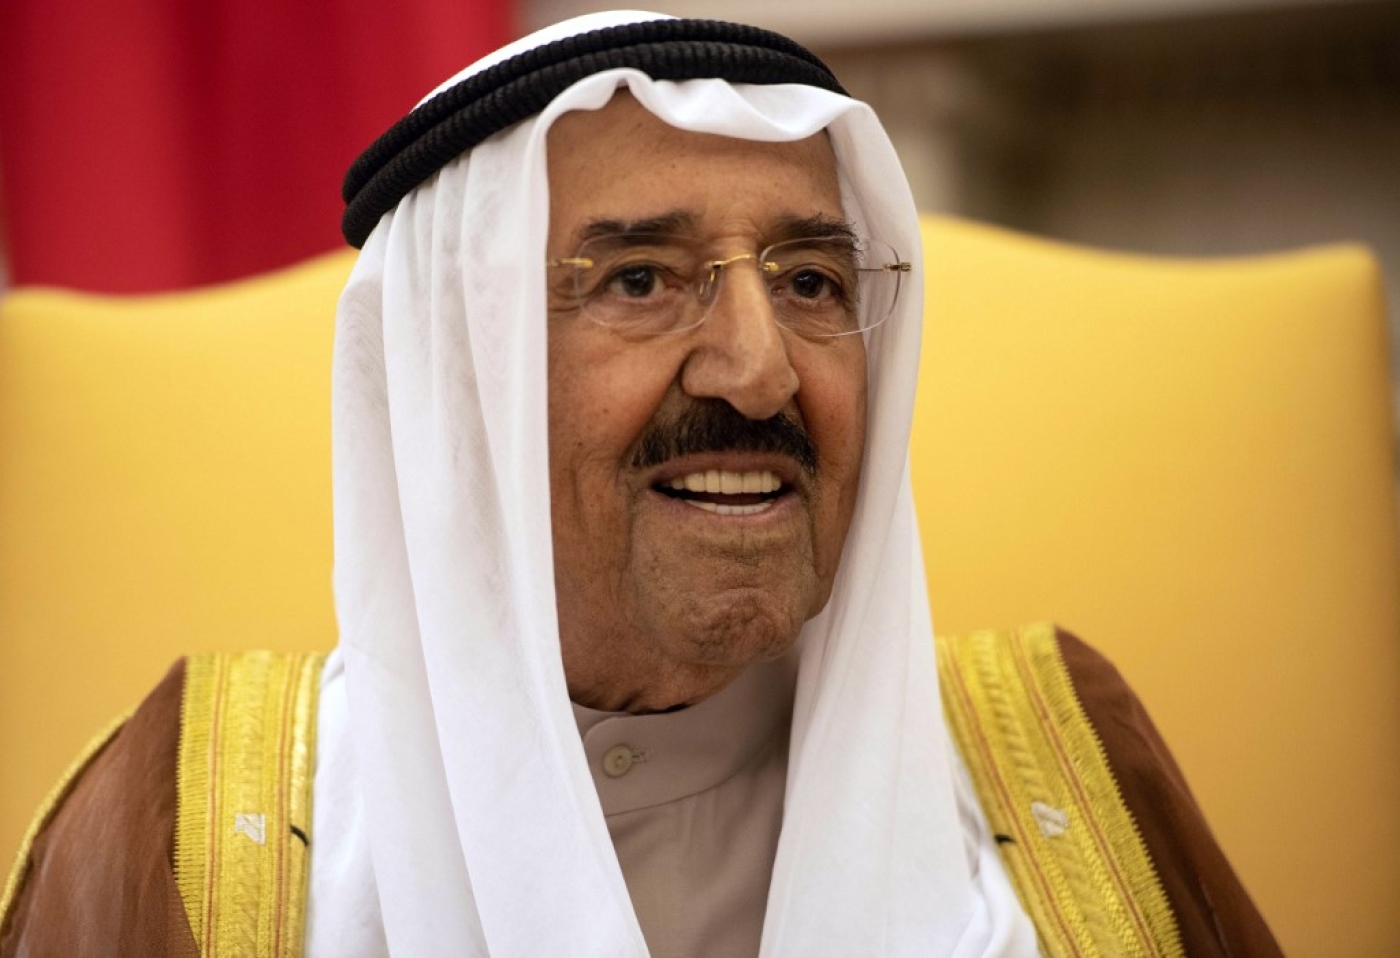 Kuwait's Sheikh Sabah has had multiple medical procedures over the past two decades.